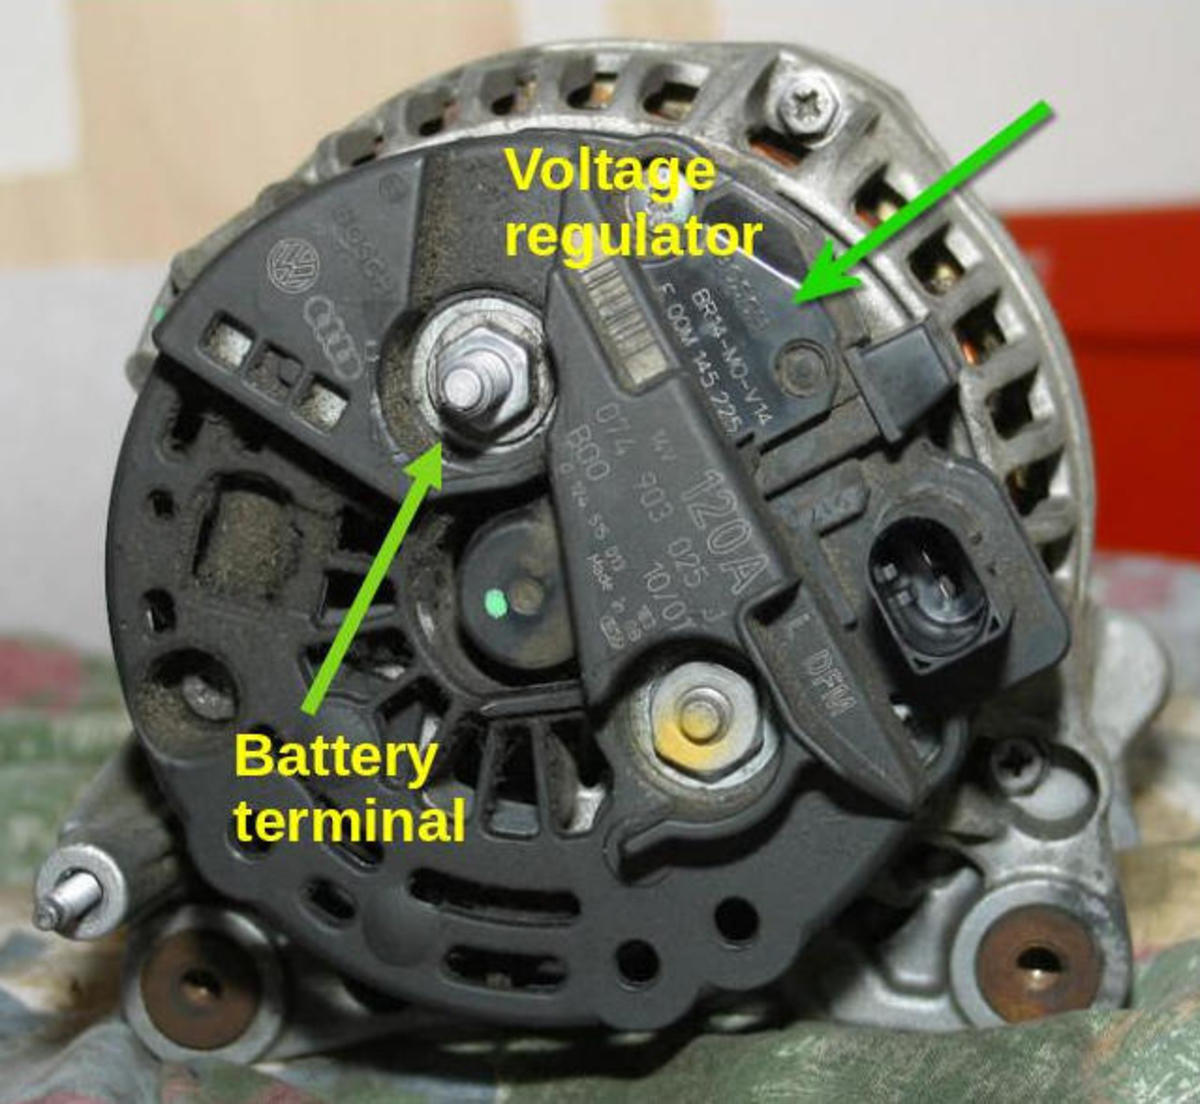 Check voltage drop between the alternator's battery terminal and the battery positive post.